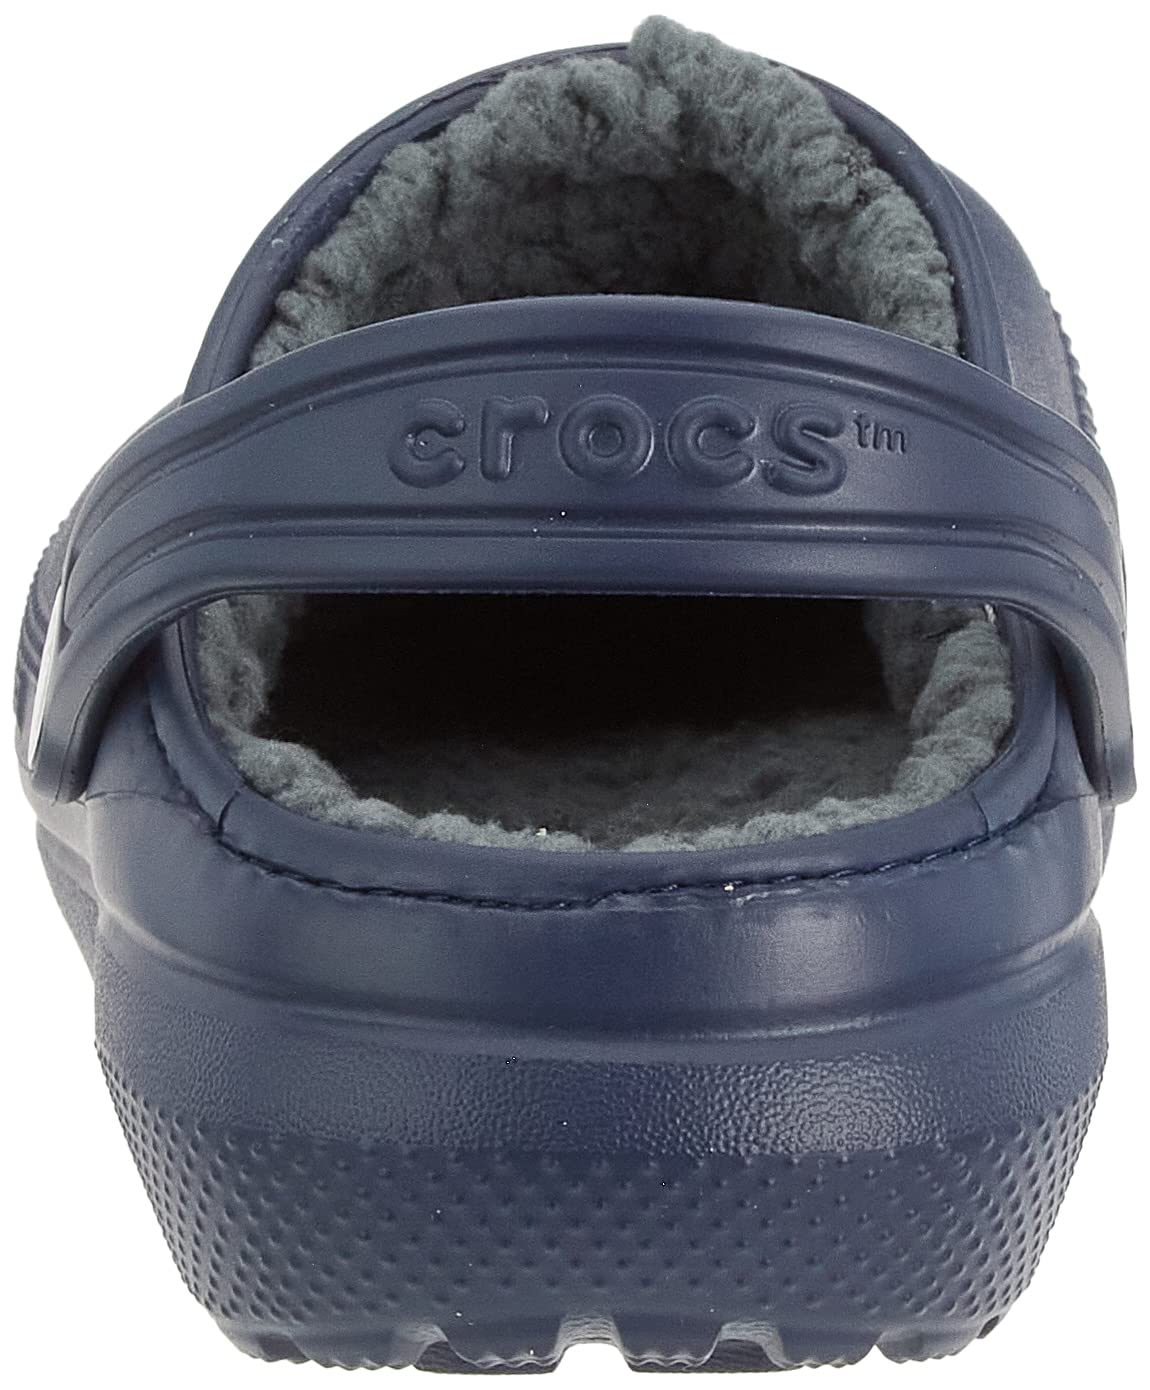 Crocs Unisex-Child Classic Lined Clog | Toddler Slippers, Navy/Charcoal, 5 Toddler